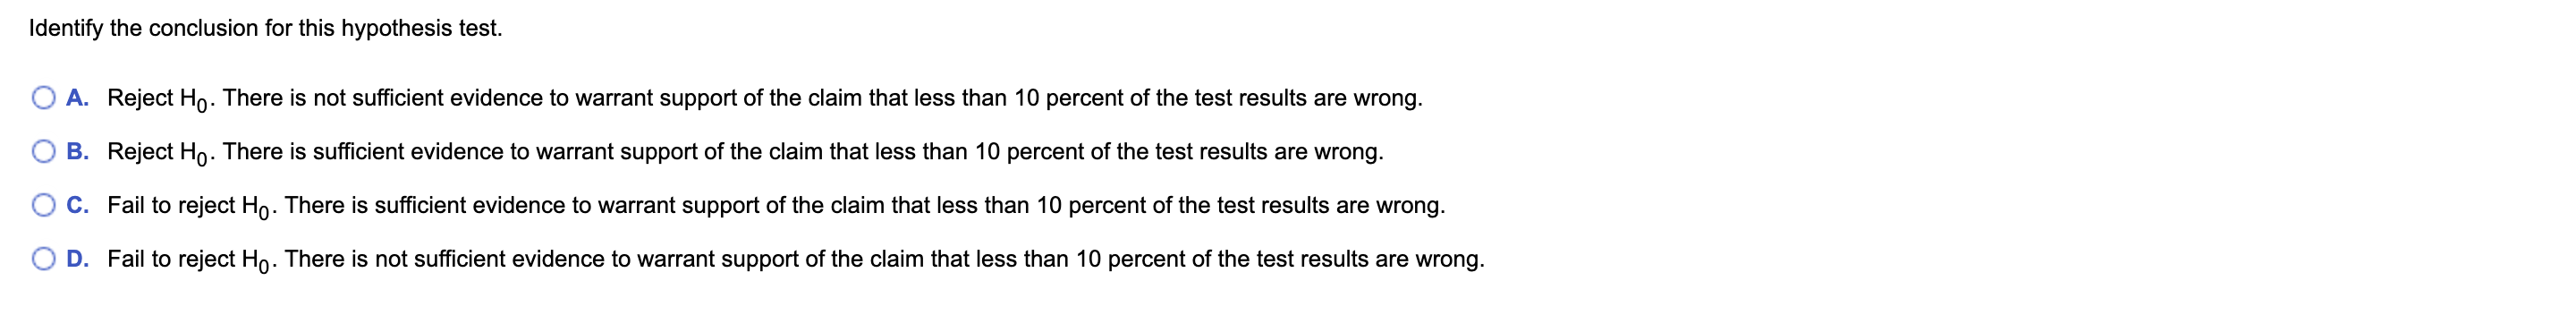 Identify the conclusion for this hypothesis test.
A. Reject Ho. There is not sufficient evidence to warrant support of the claim that less than 10 percent of the test results are wrong.
B. Reject Ho. There is sufficient evidence to warrant support of the claim that less than 10 percent of the test results are wrong.
C. Fail to reject Ho. There is sufficient evidence to warrant support of the claim that less than 10 percent of the test results are wrong.
D.
Fail to reject Ho. There is not sufficient evidence to warrant support of the claim that less than 10 percent of the test results are wrong.
